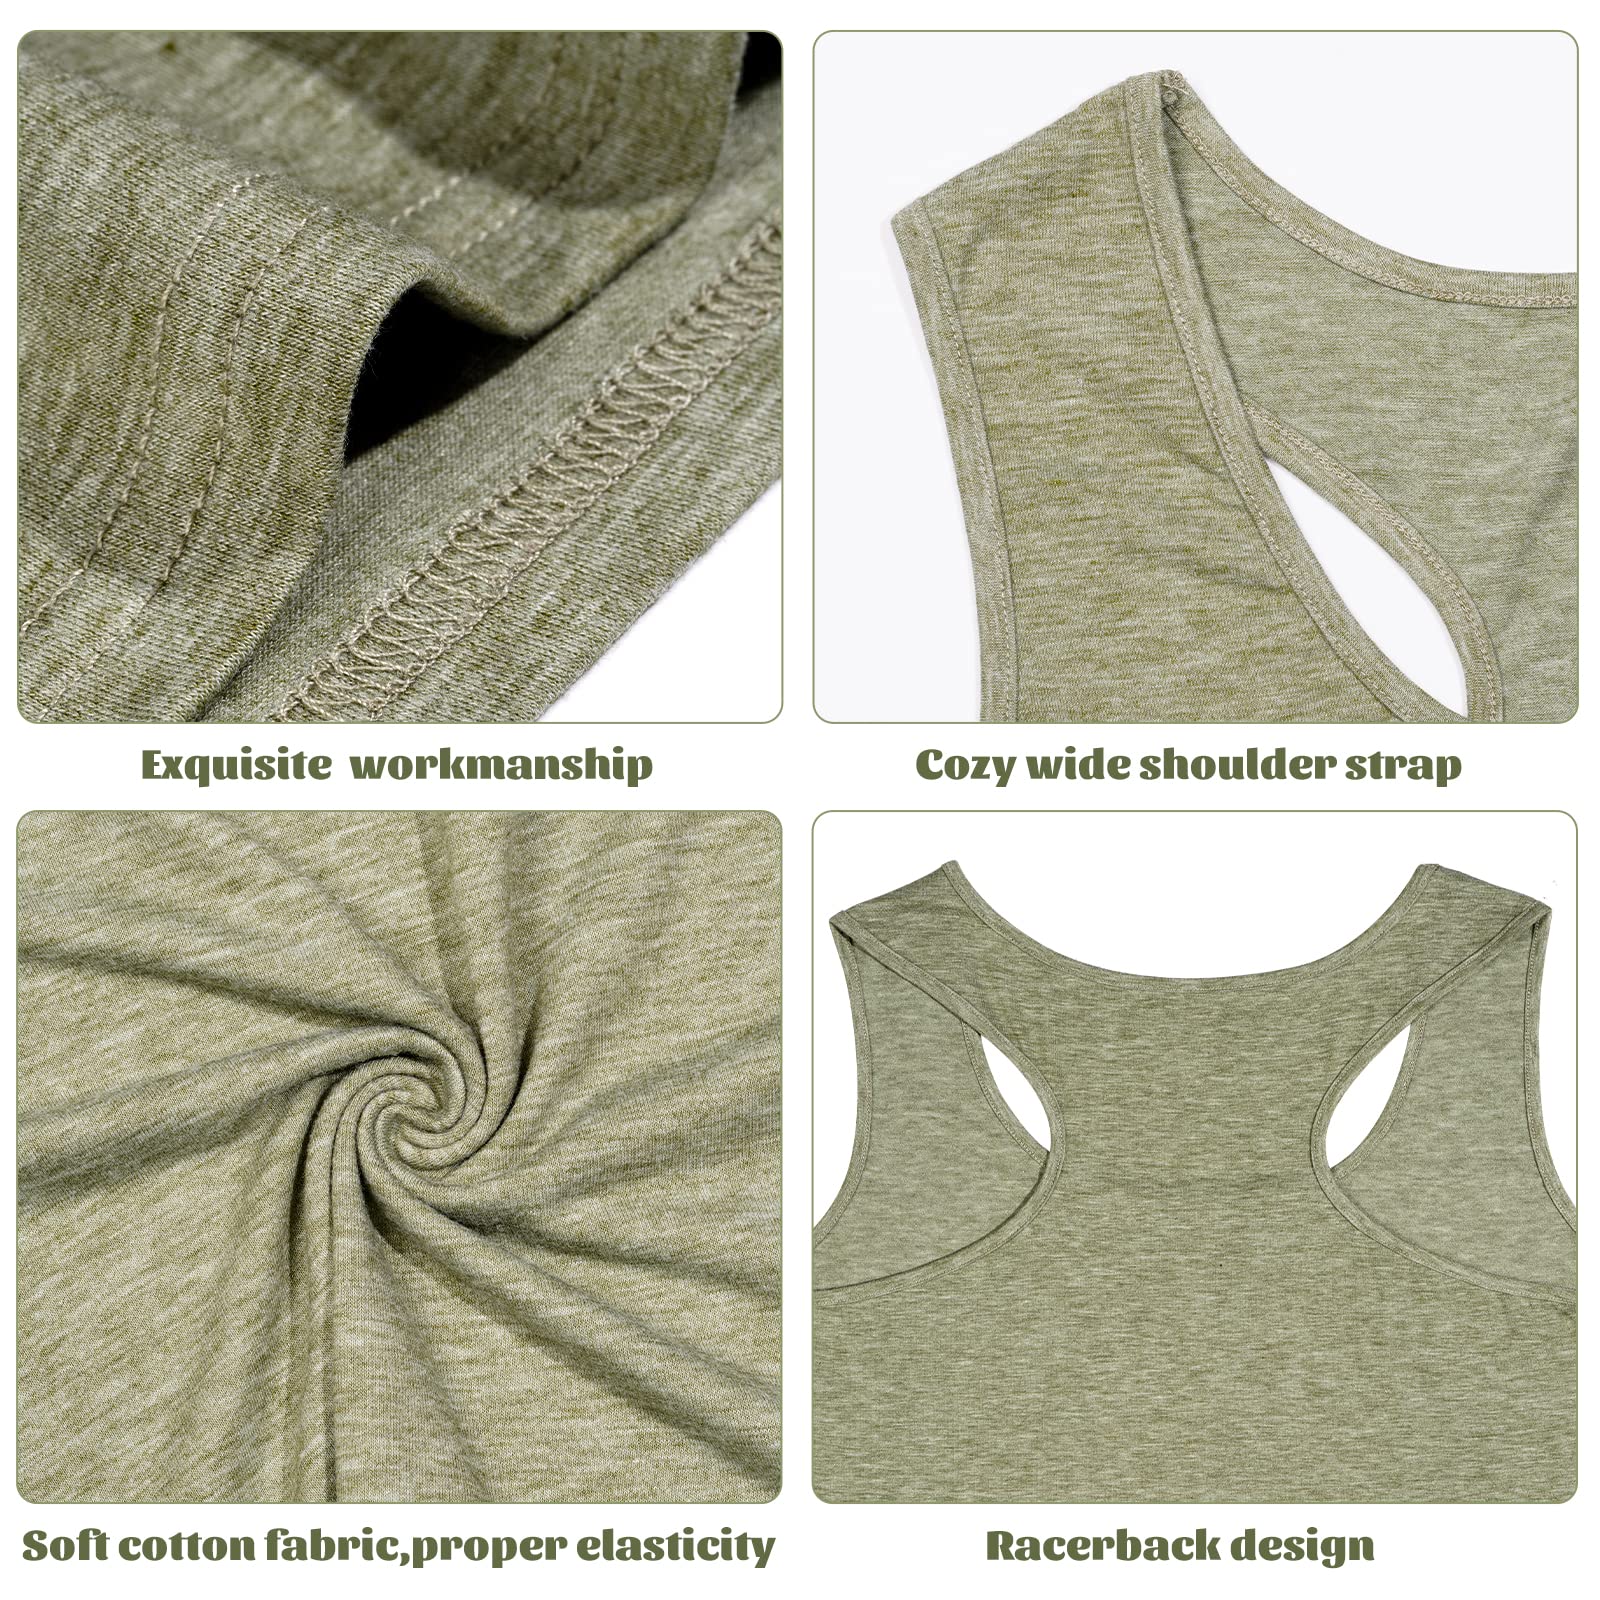 3 Pieces Basic Plus Size Tank Tops for Women-Black,Grey,Army Green - Moon Wood